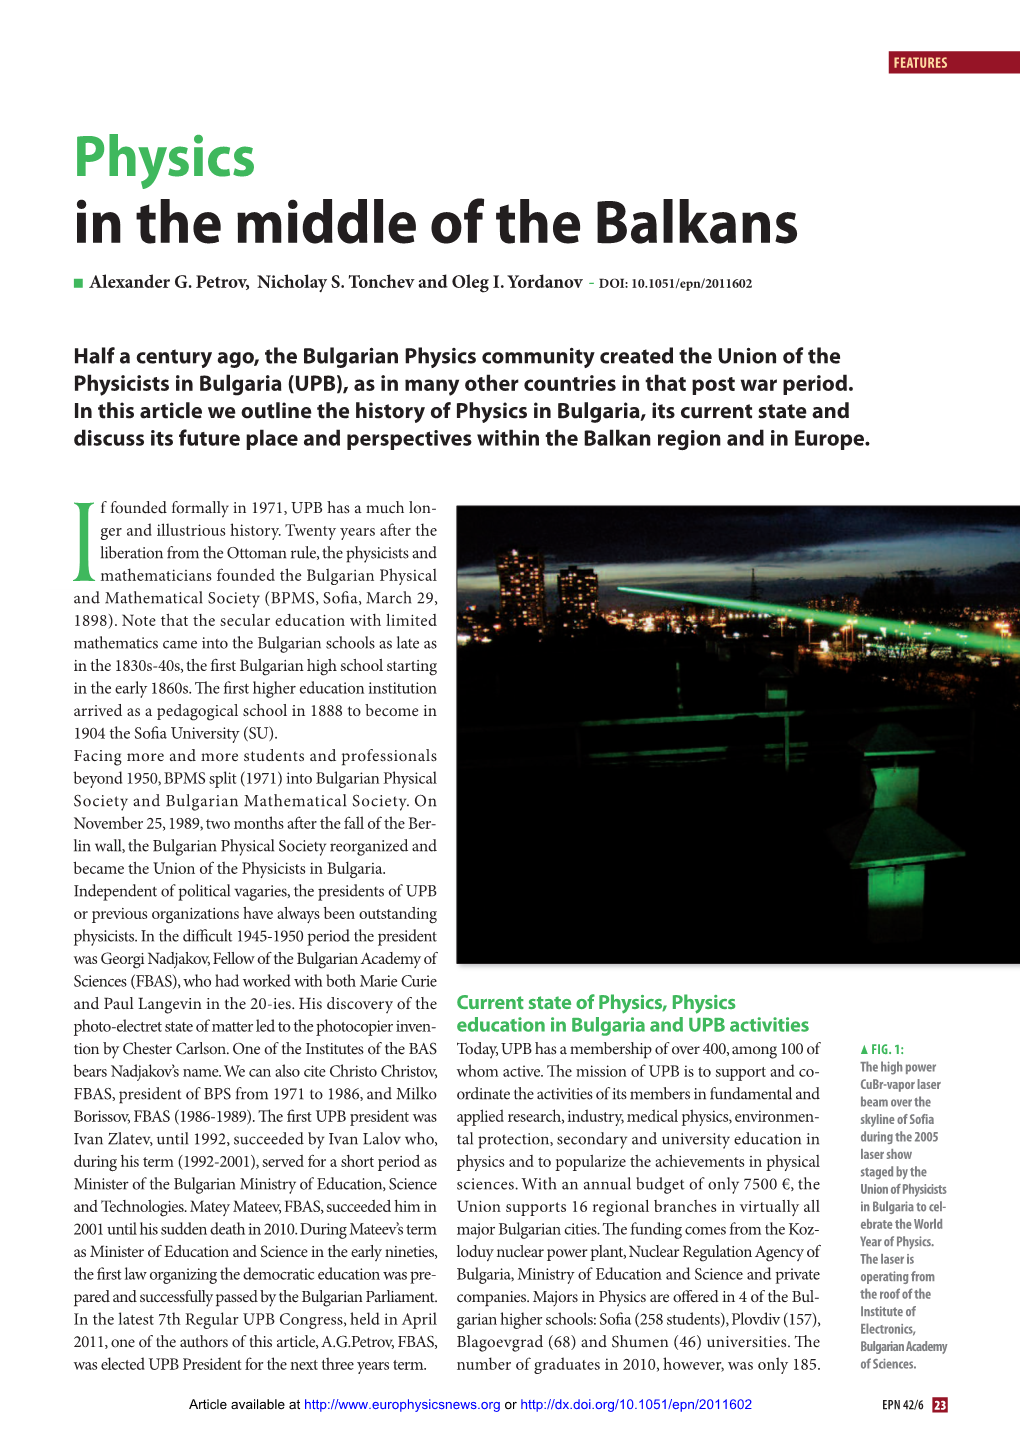 Physics in the Middle of the Balkans